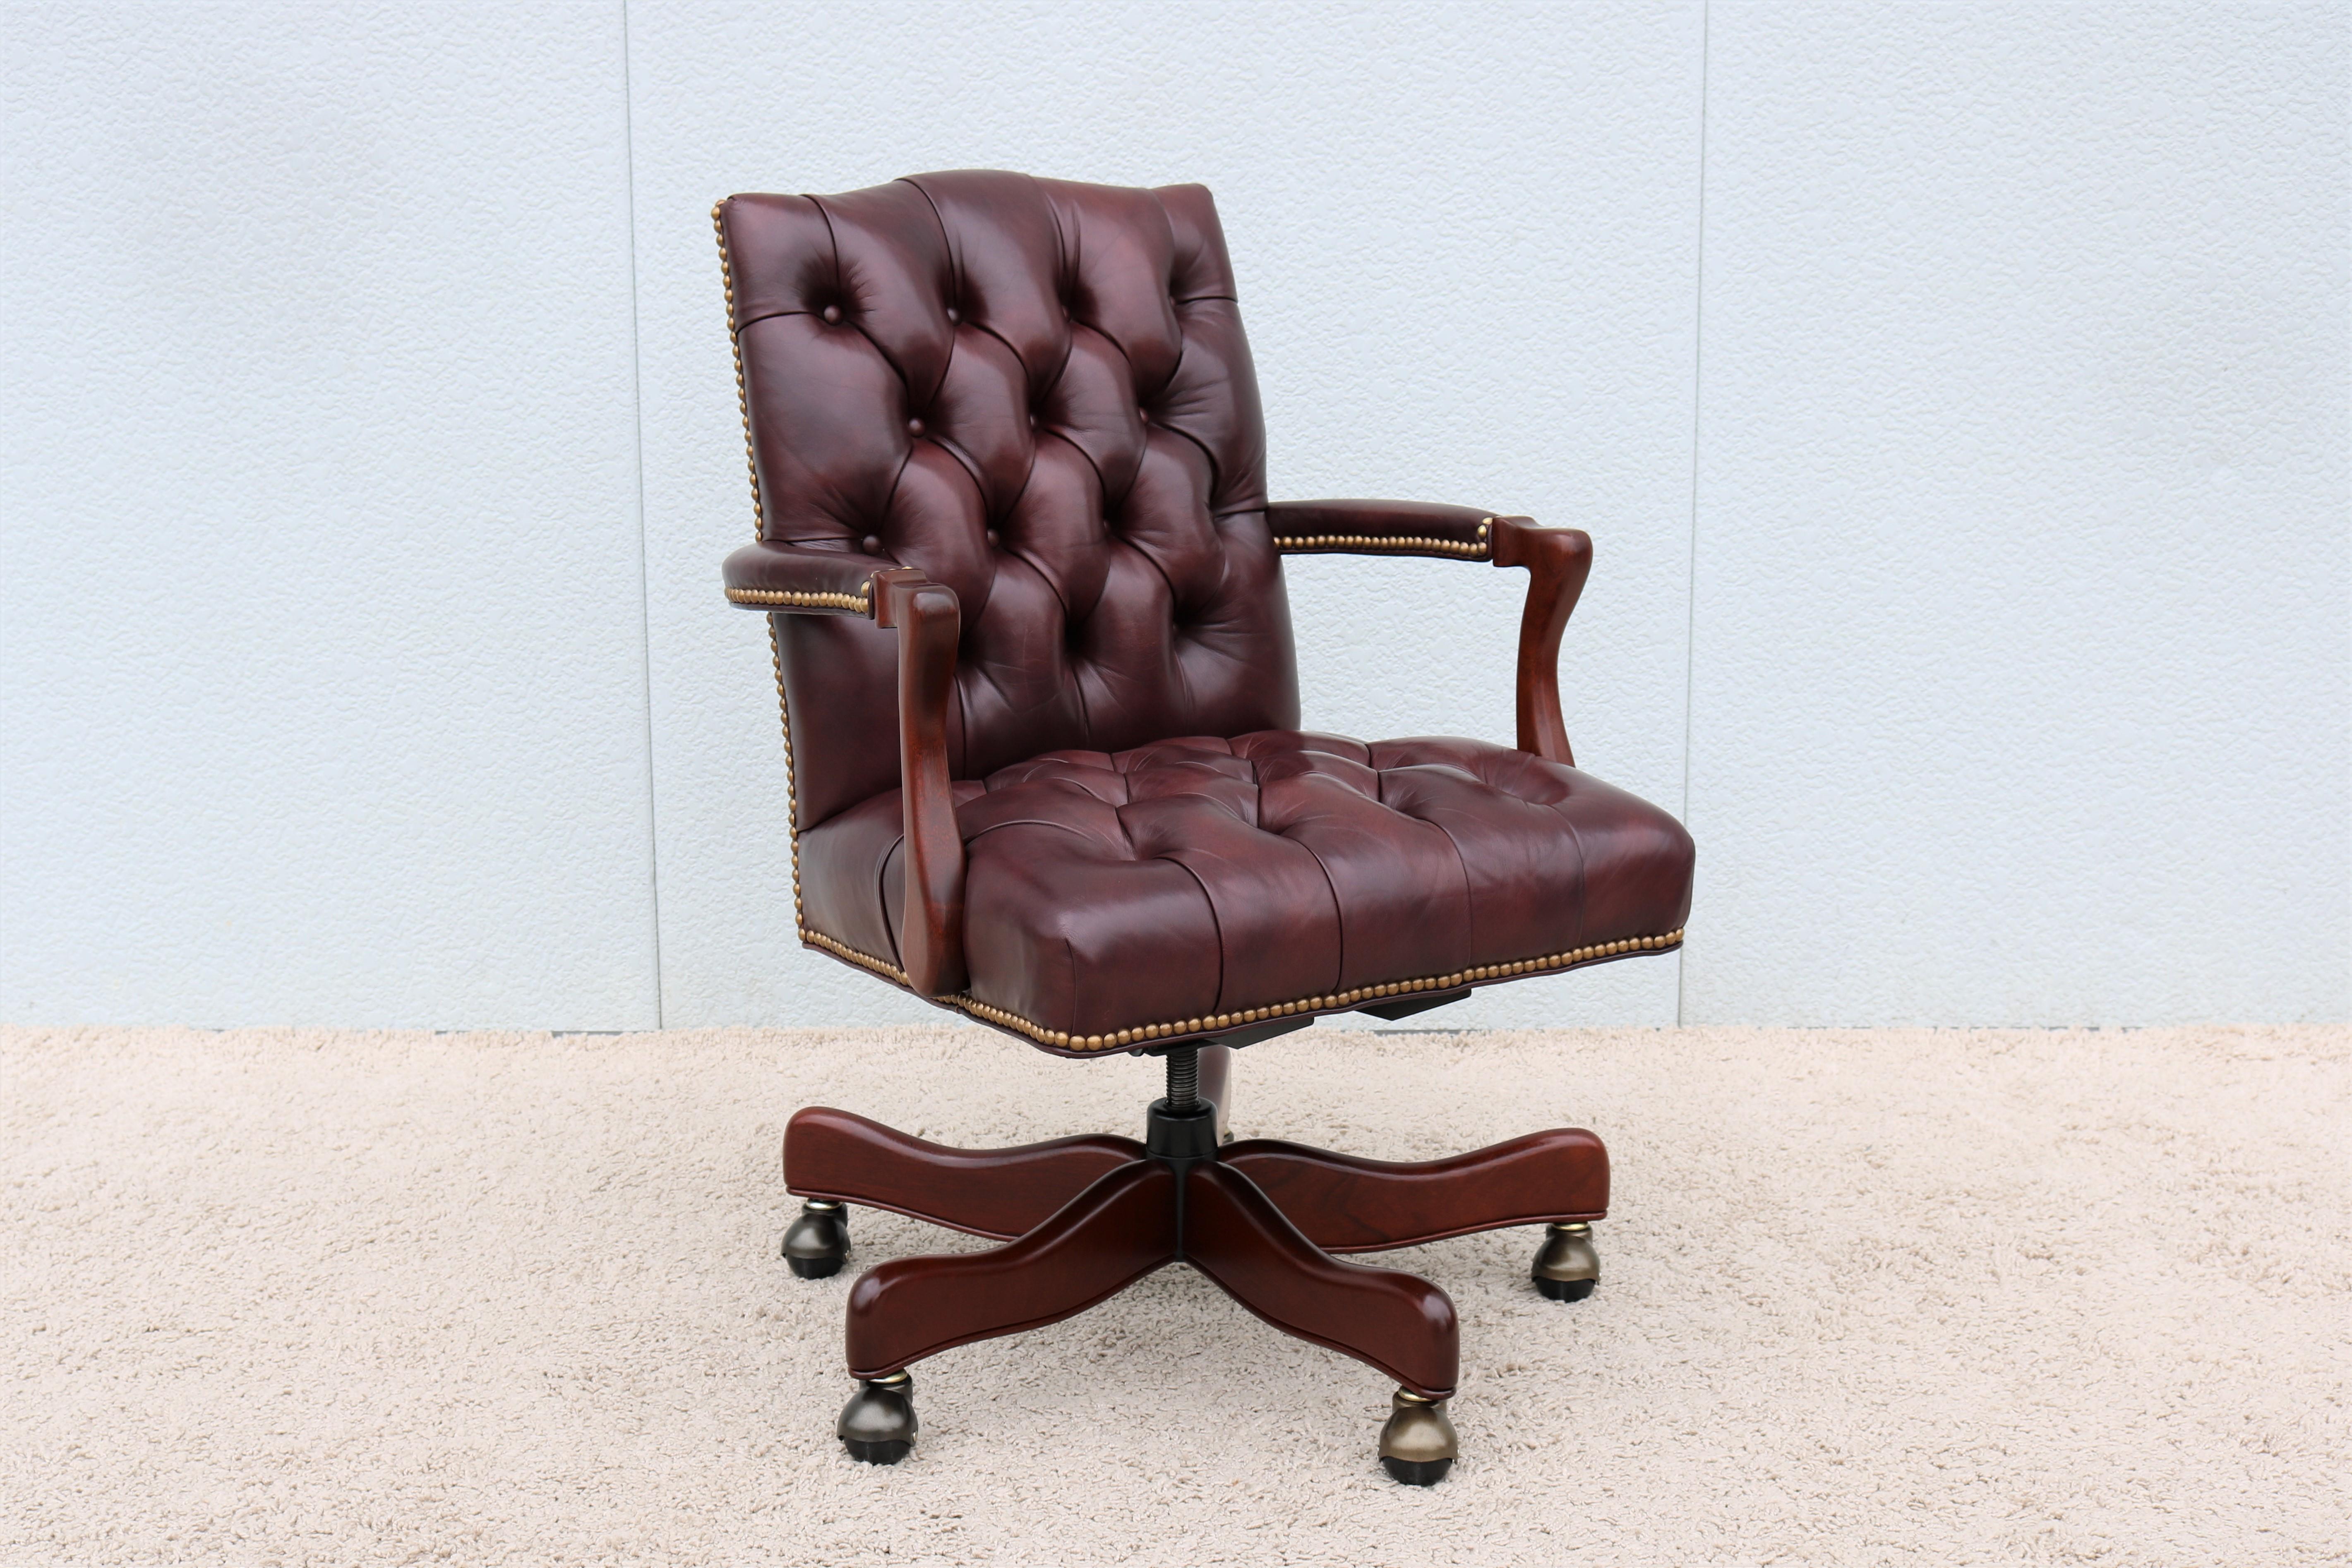 Classic Cabot Wrenn Graham Tufted Burgundy Leather Executive Swivel Desk Chair In Good Condition For Sale In Secaucus, NJ